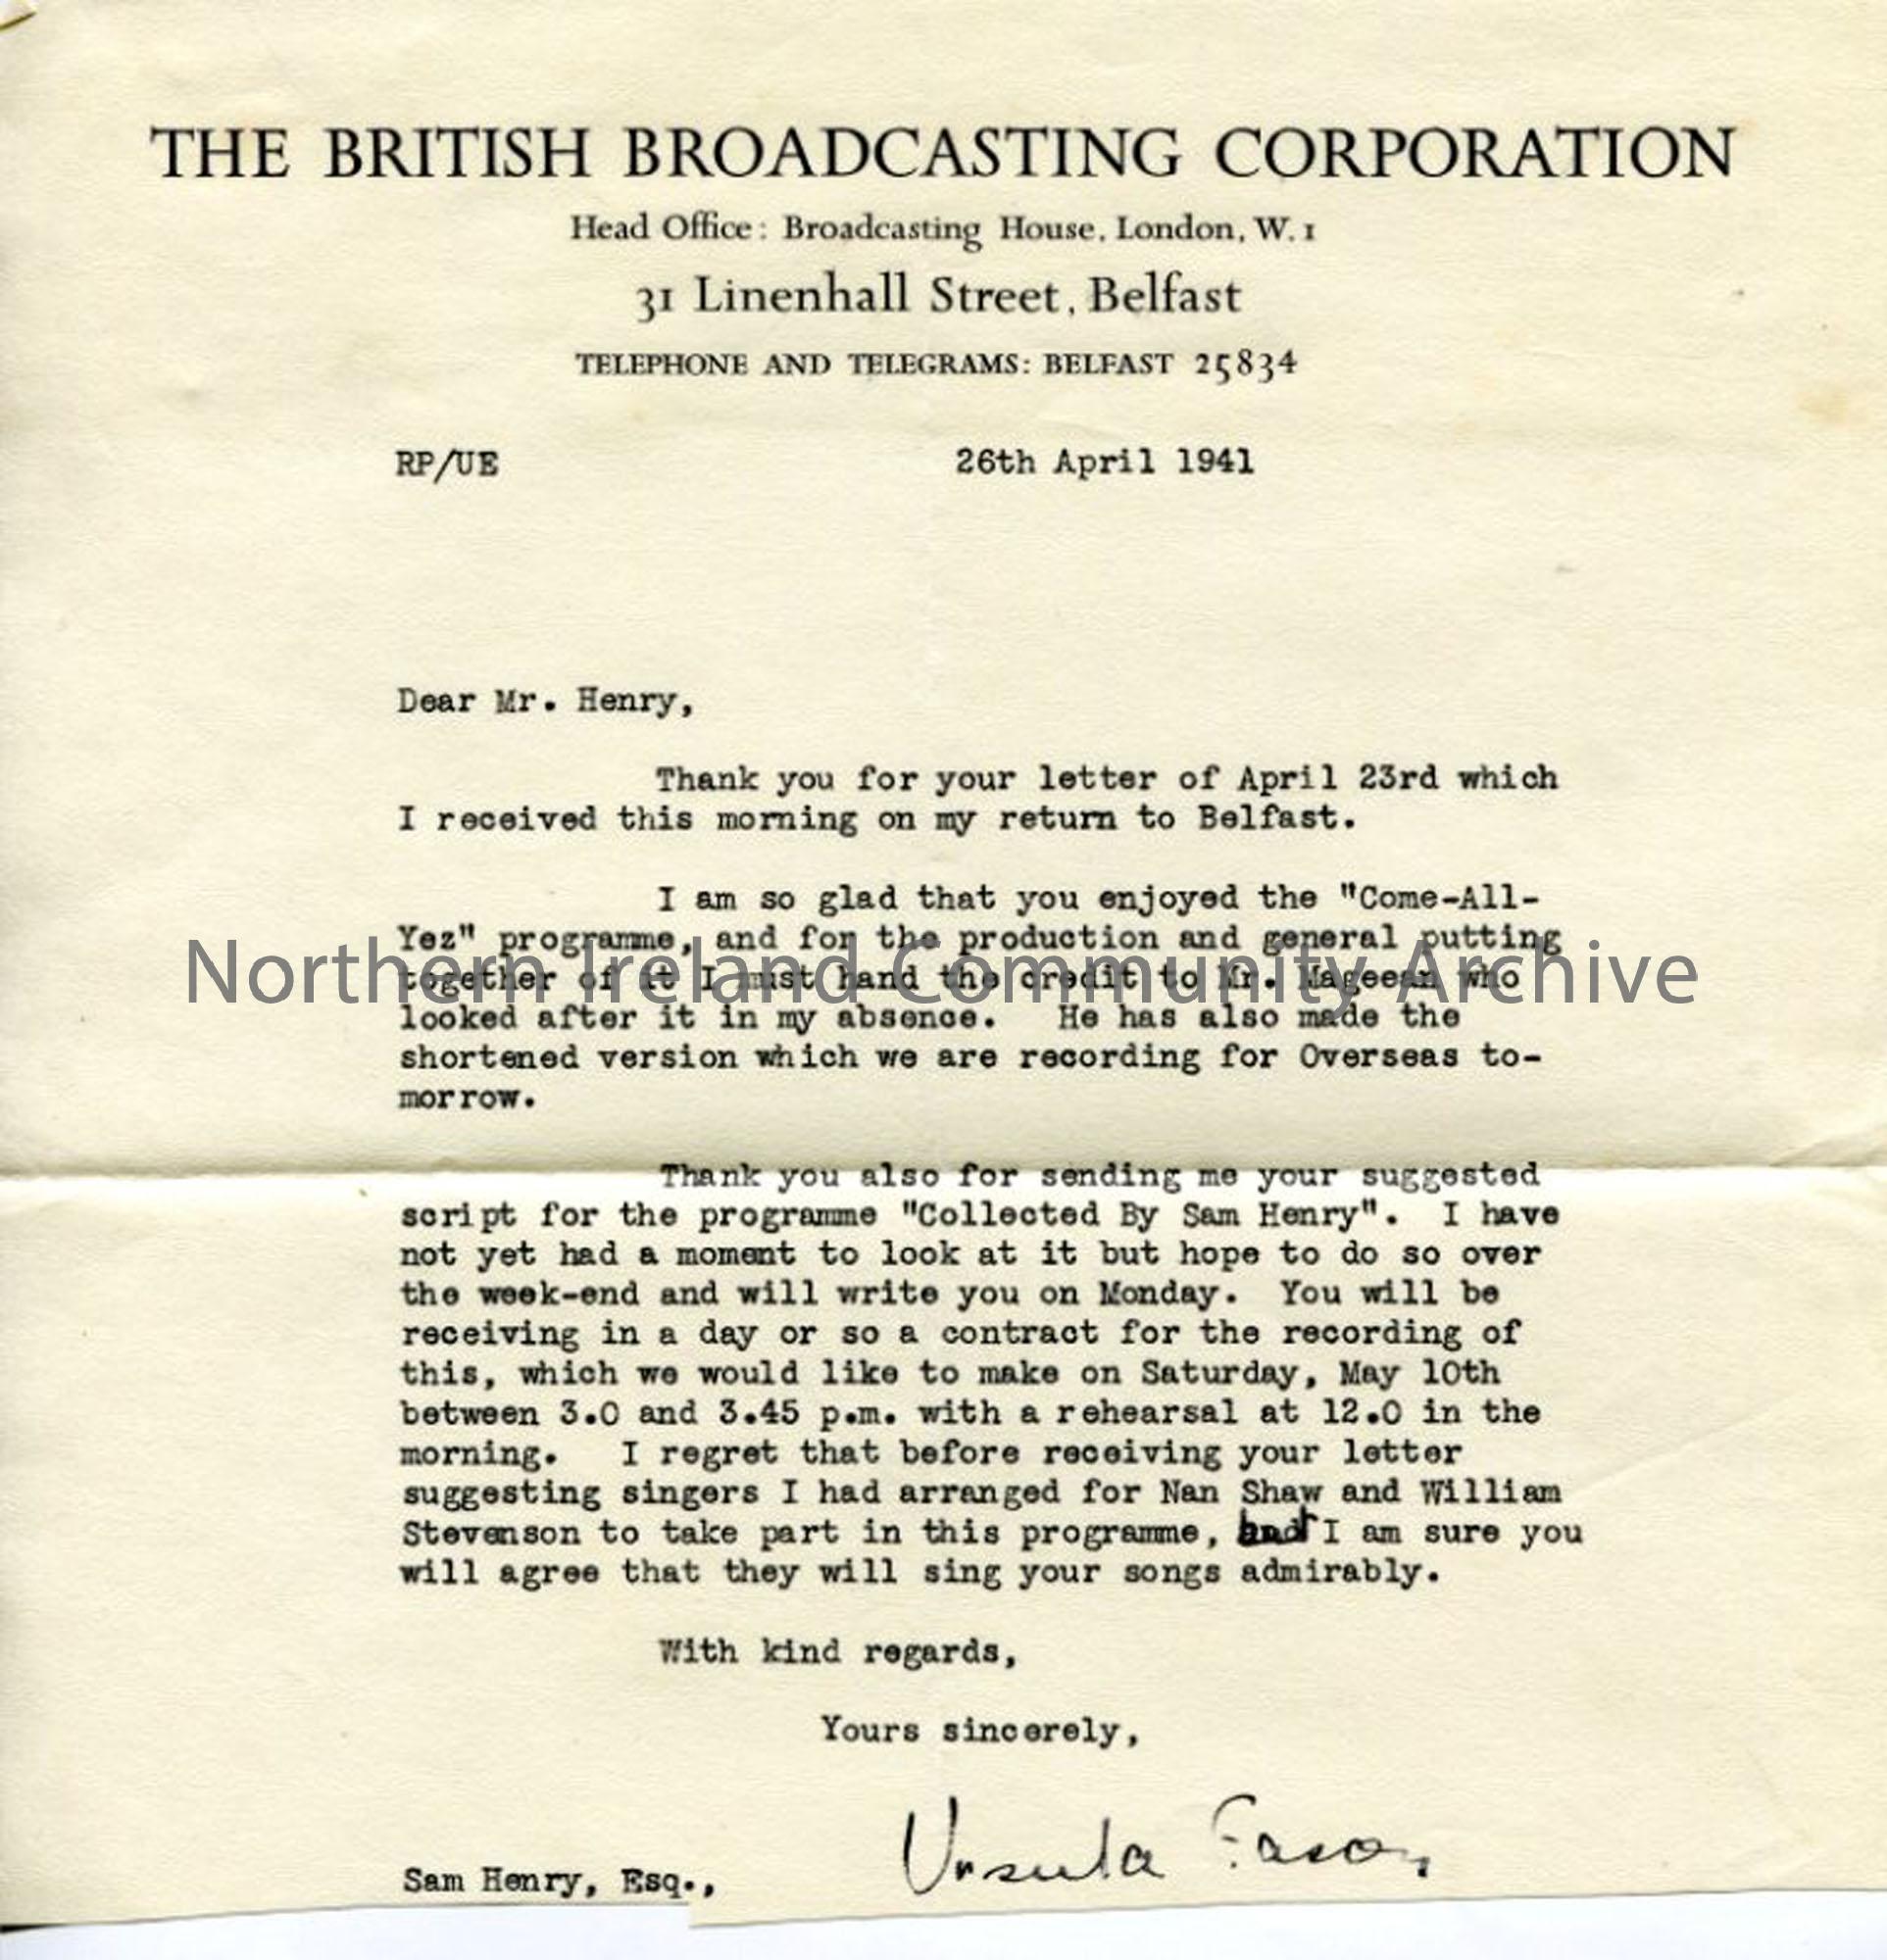 Letter from Ursula Eason of the BBC, dated 26.4.1941